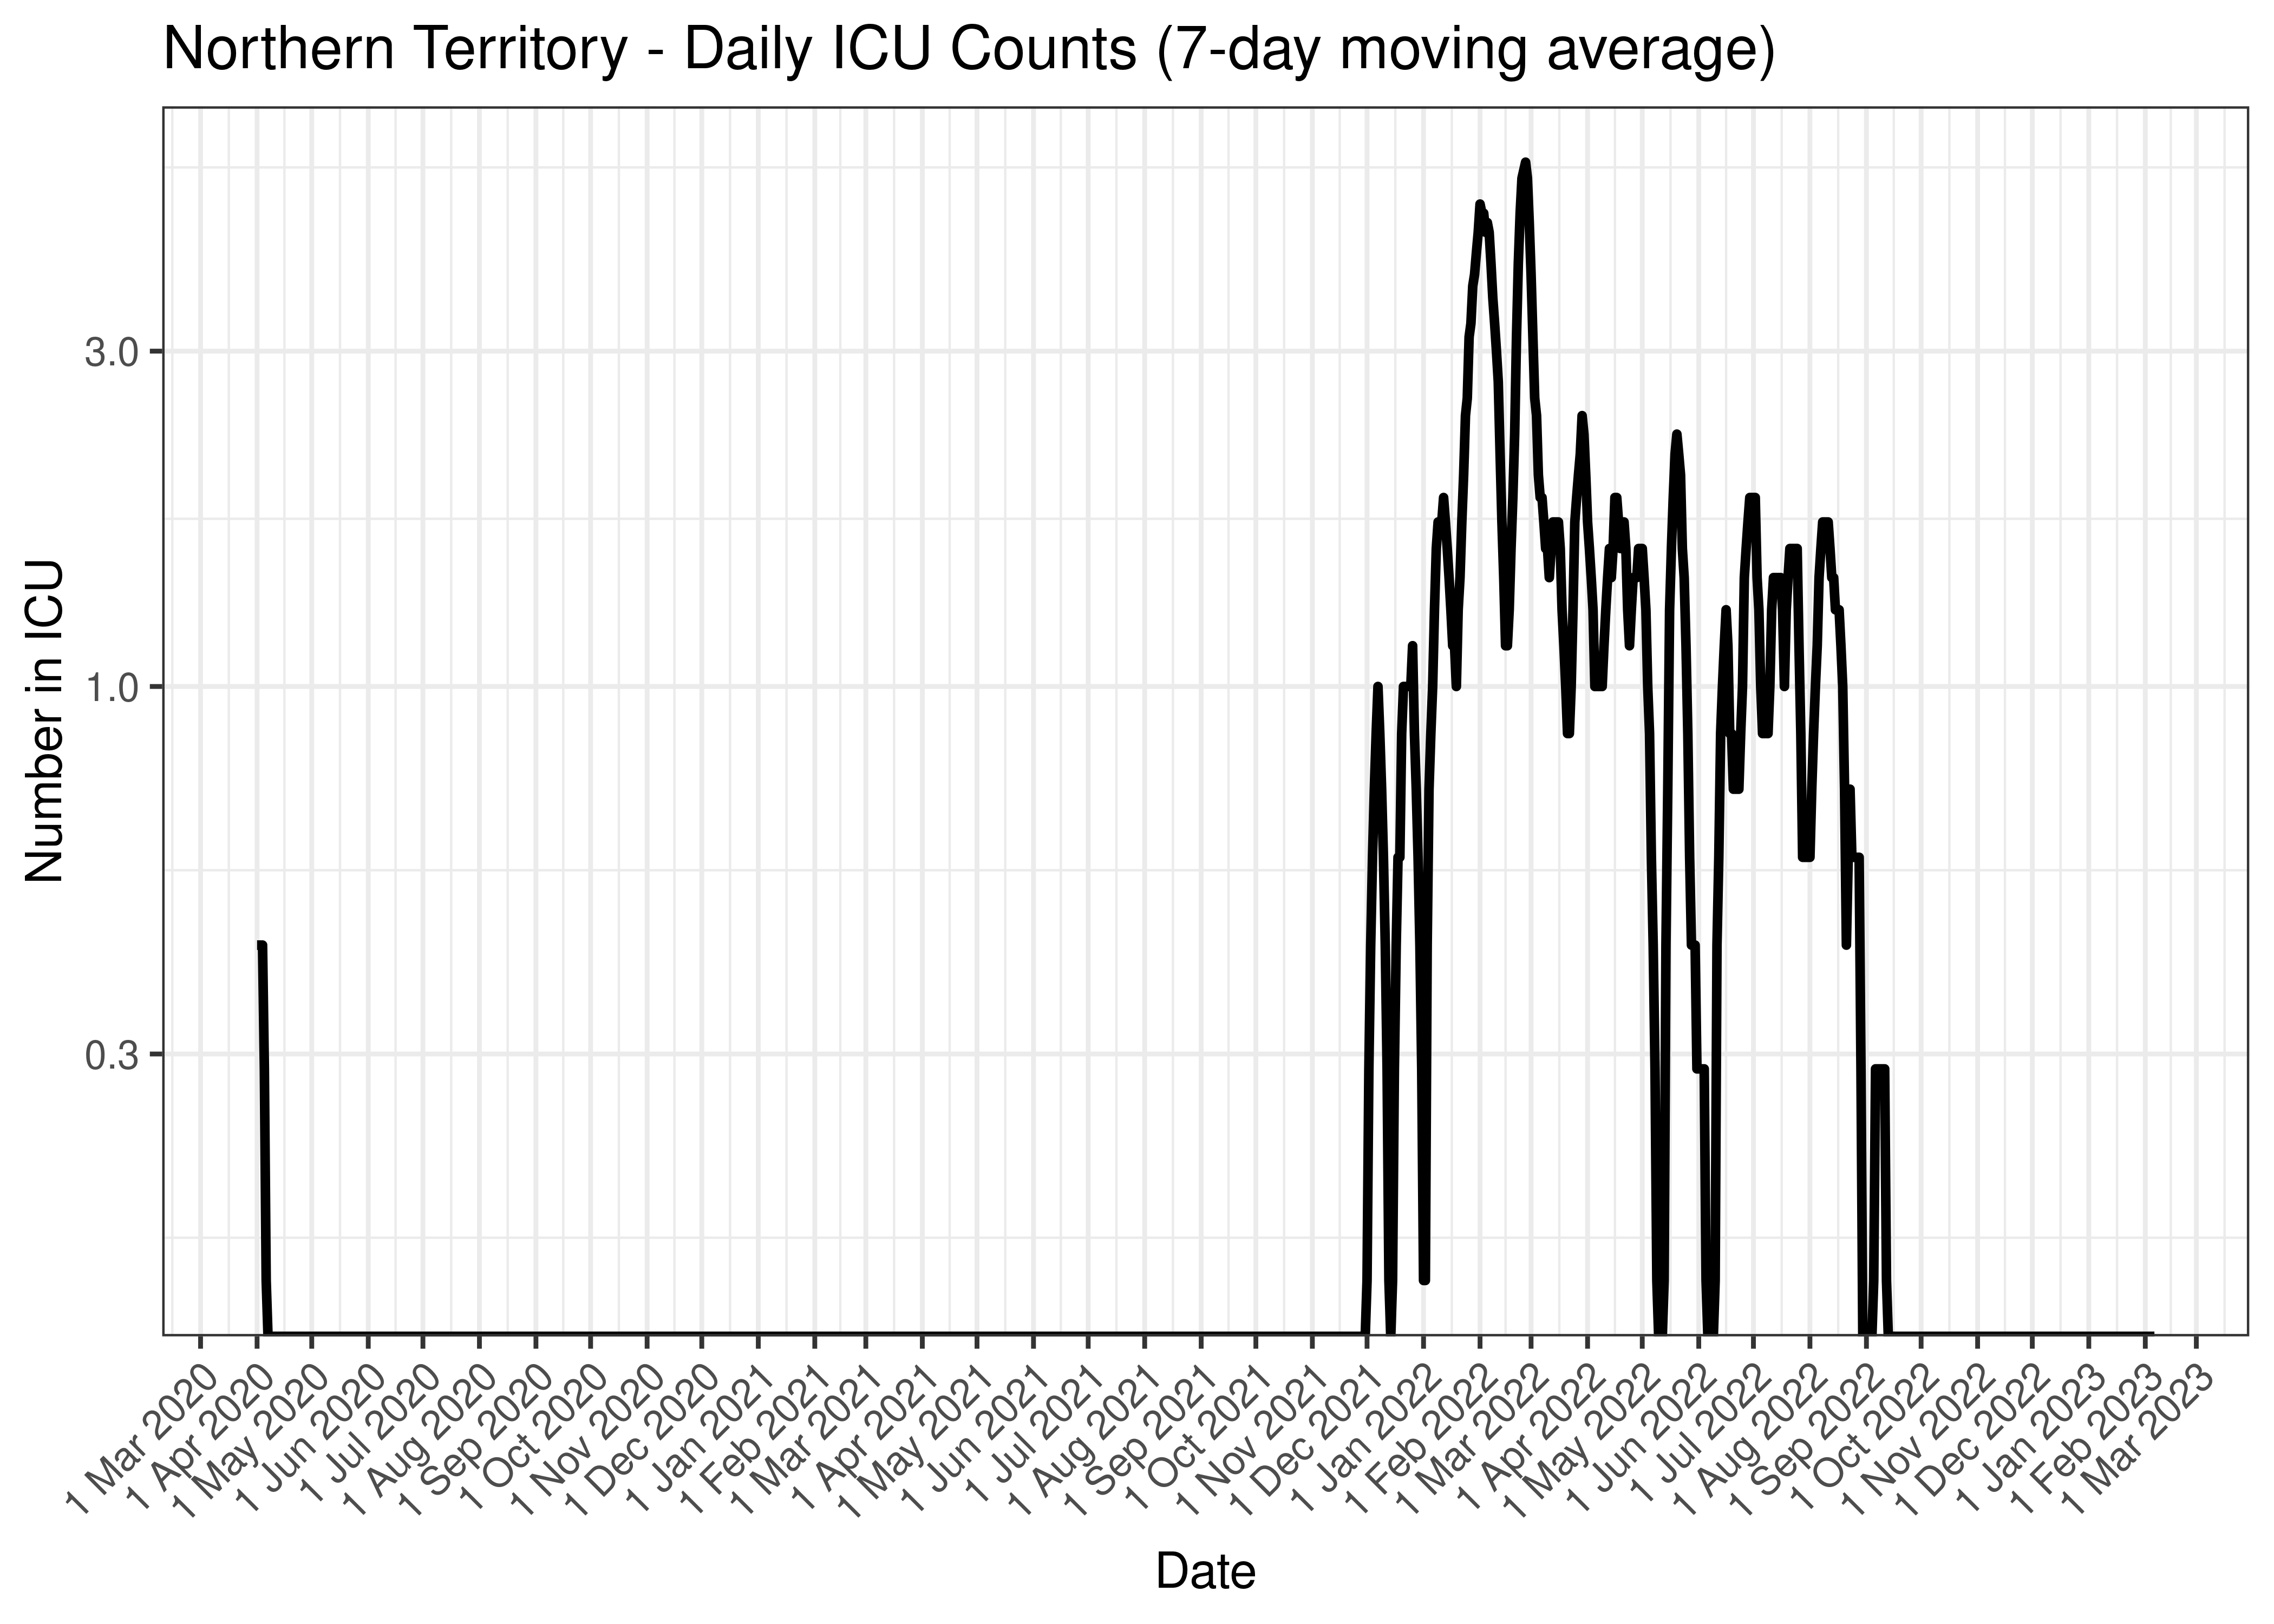 Northern Territory - Daily ICU Counts (7-day moving average)